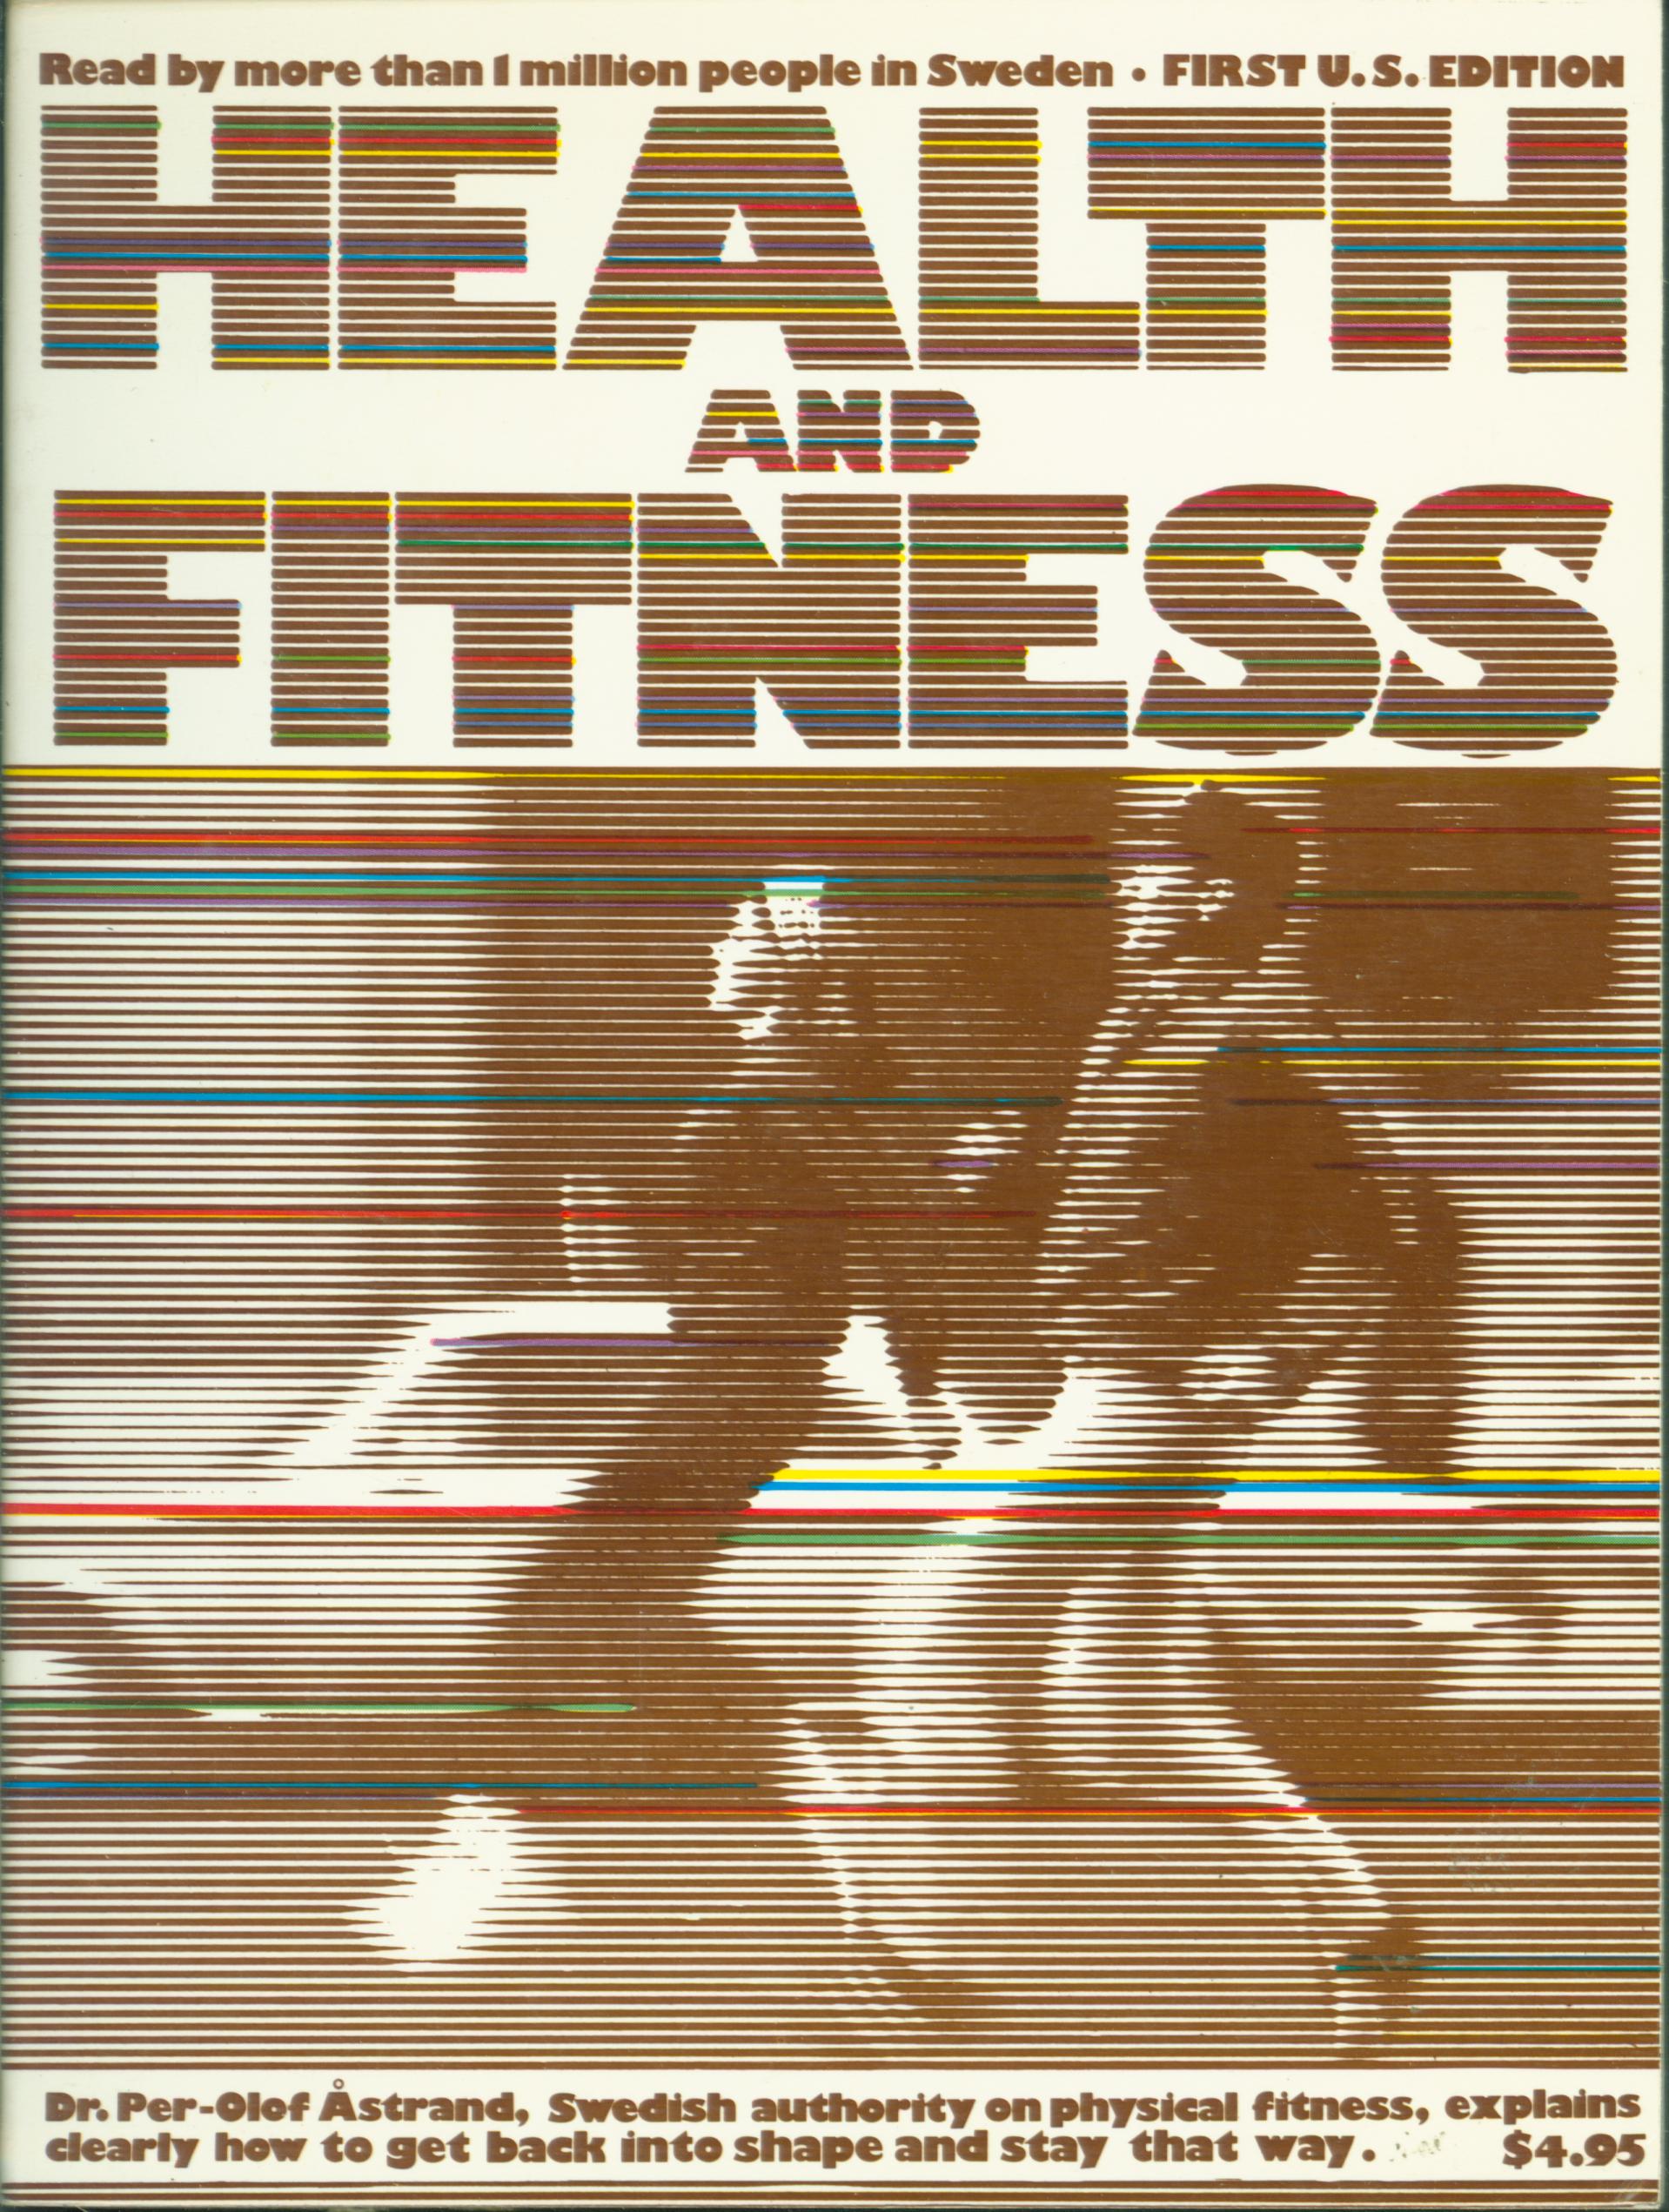 HEALTH AND FITNESS. 